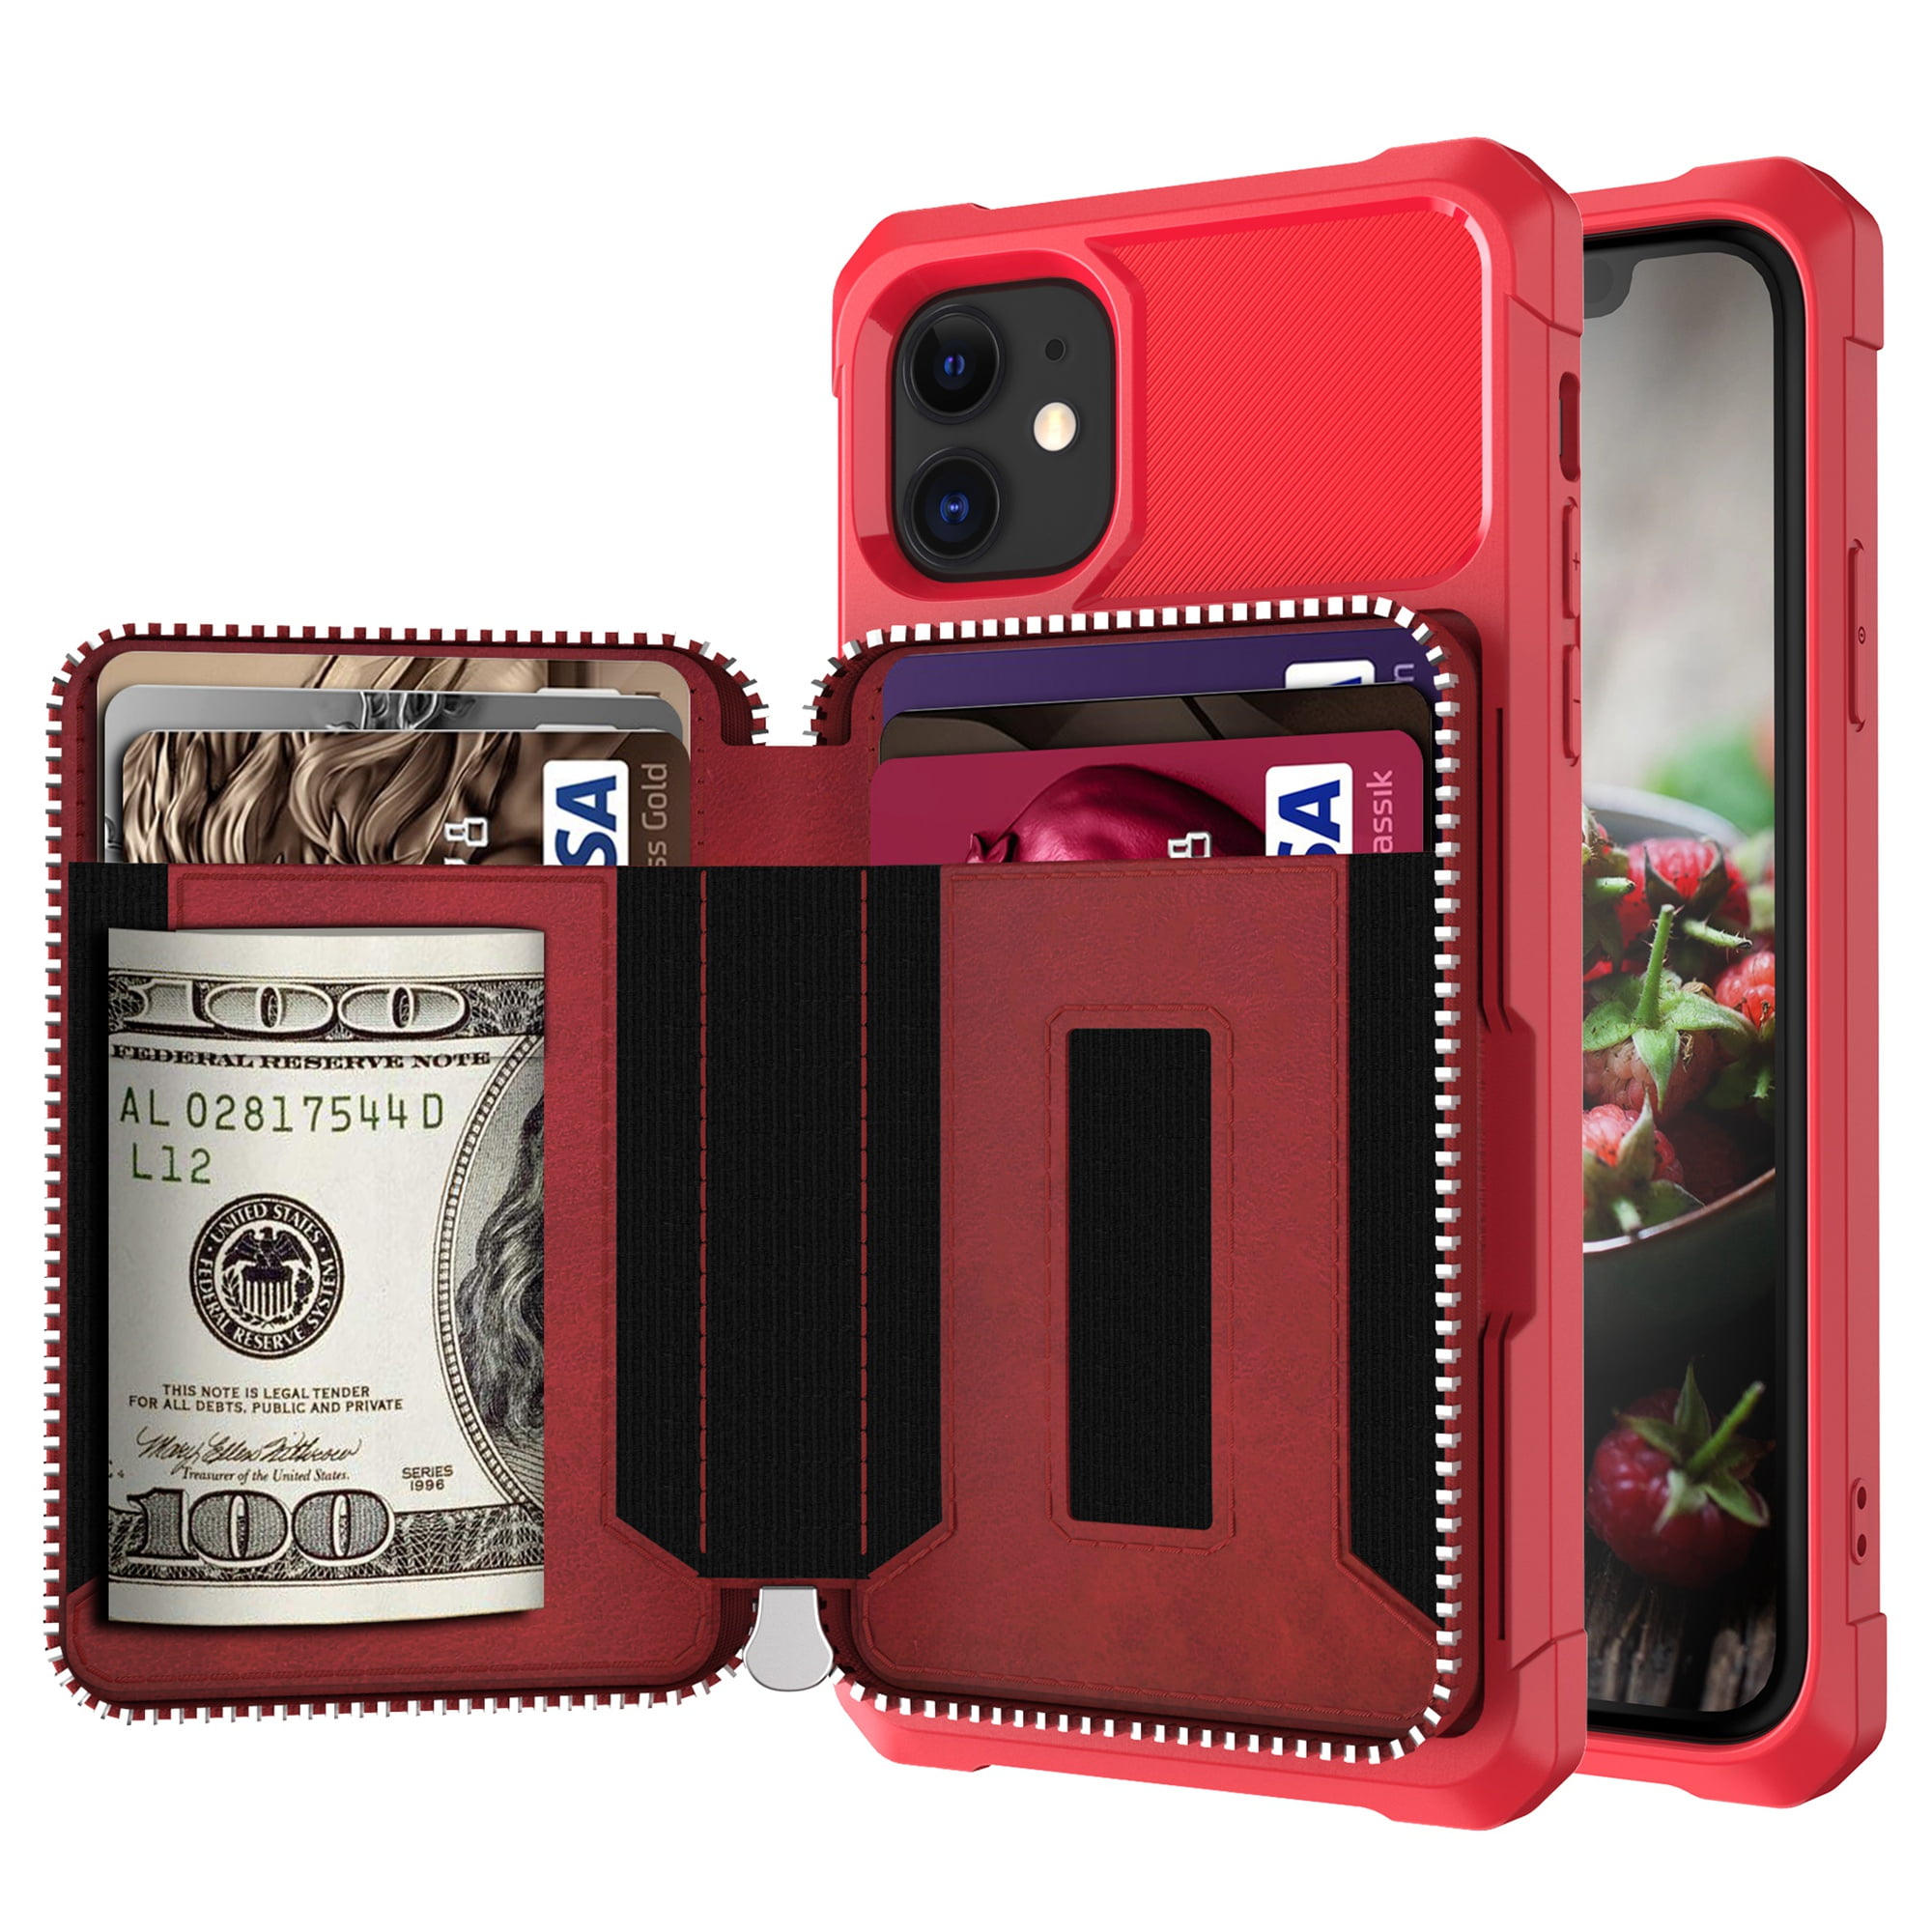 Dteck Wallet Case For iPhone 11, Zipper Wallet Case with Credit Card Holder Slot Purse Leather ...